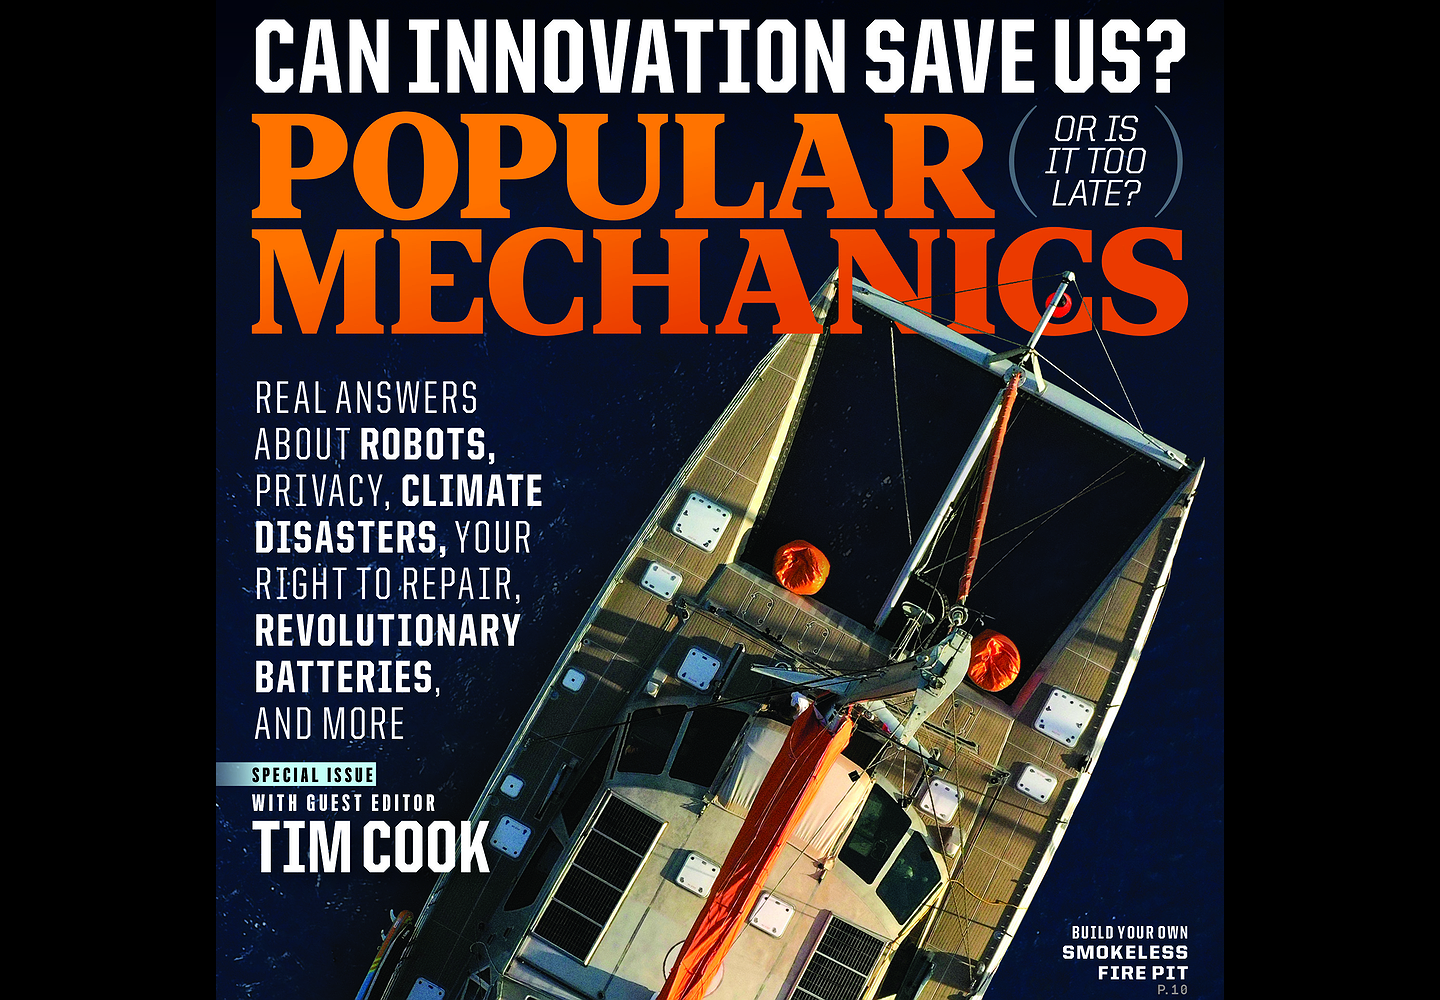 Popular Mechanics Highlights "Responsible Innovation" In Issue Guest Edited by Apple CEO Tim Cook